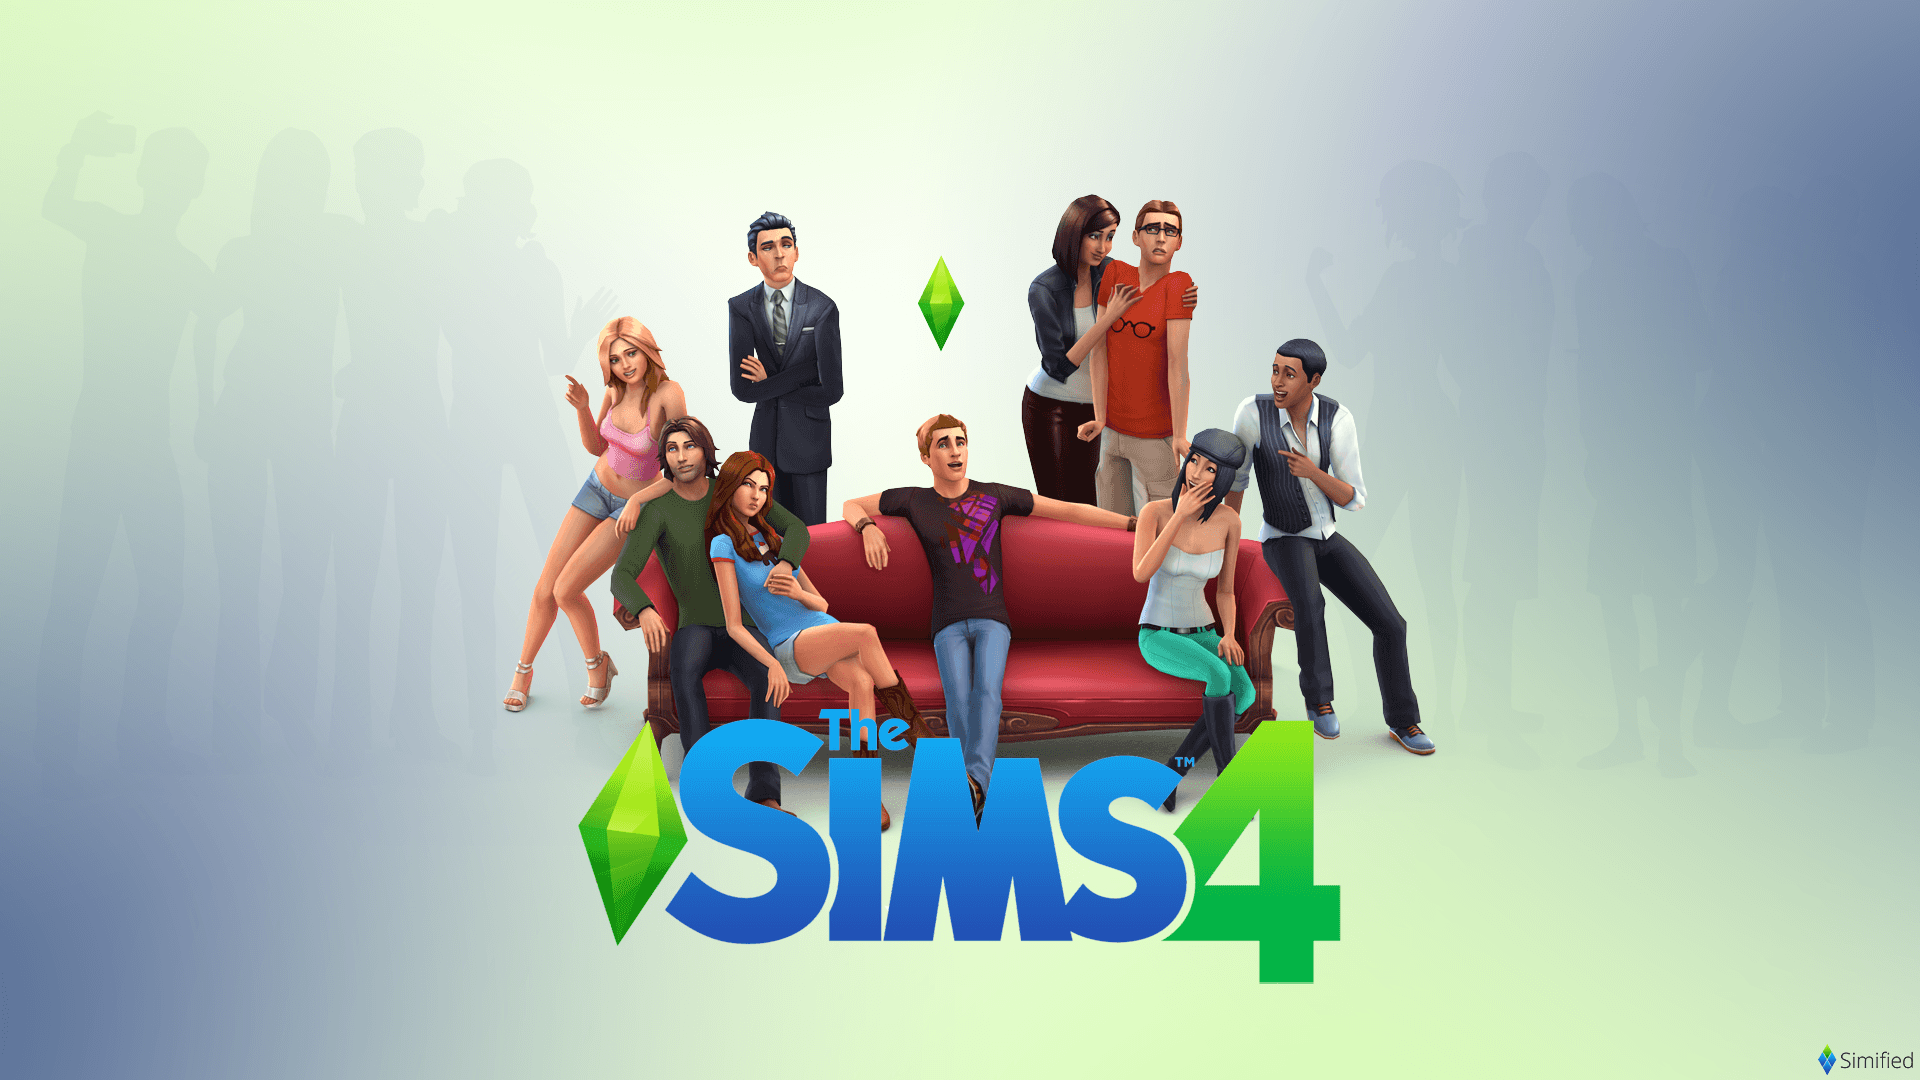 The sims 4 steam price фото 96